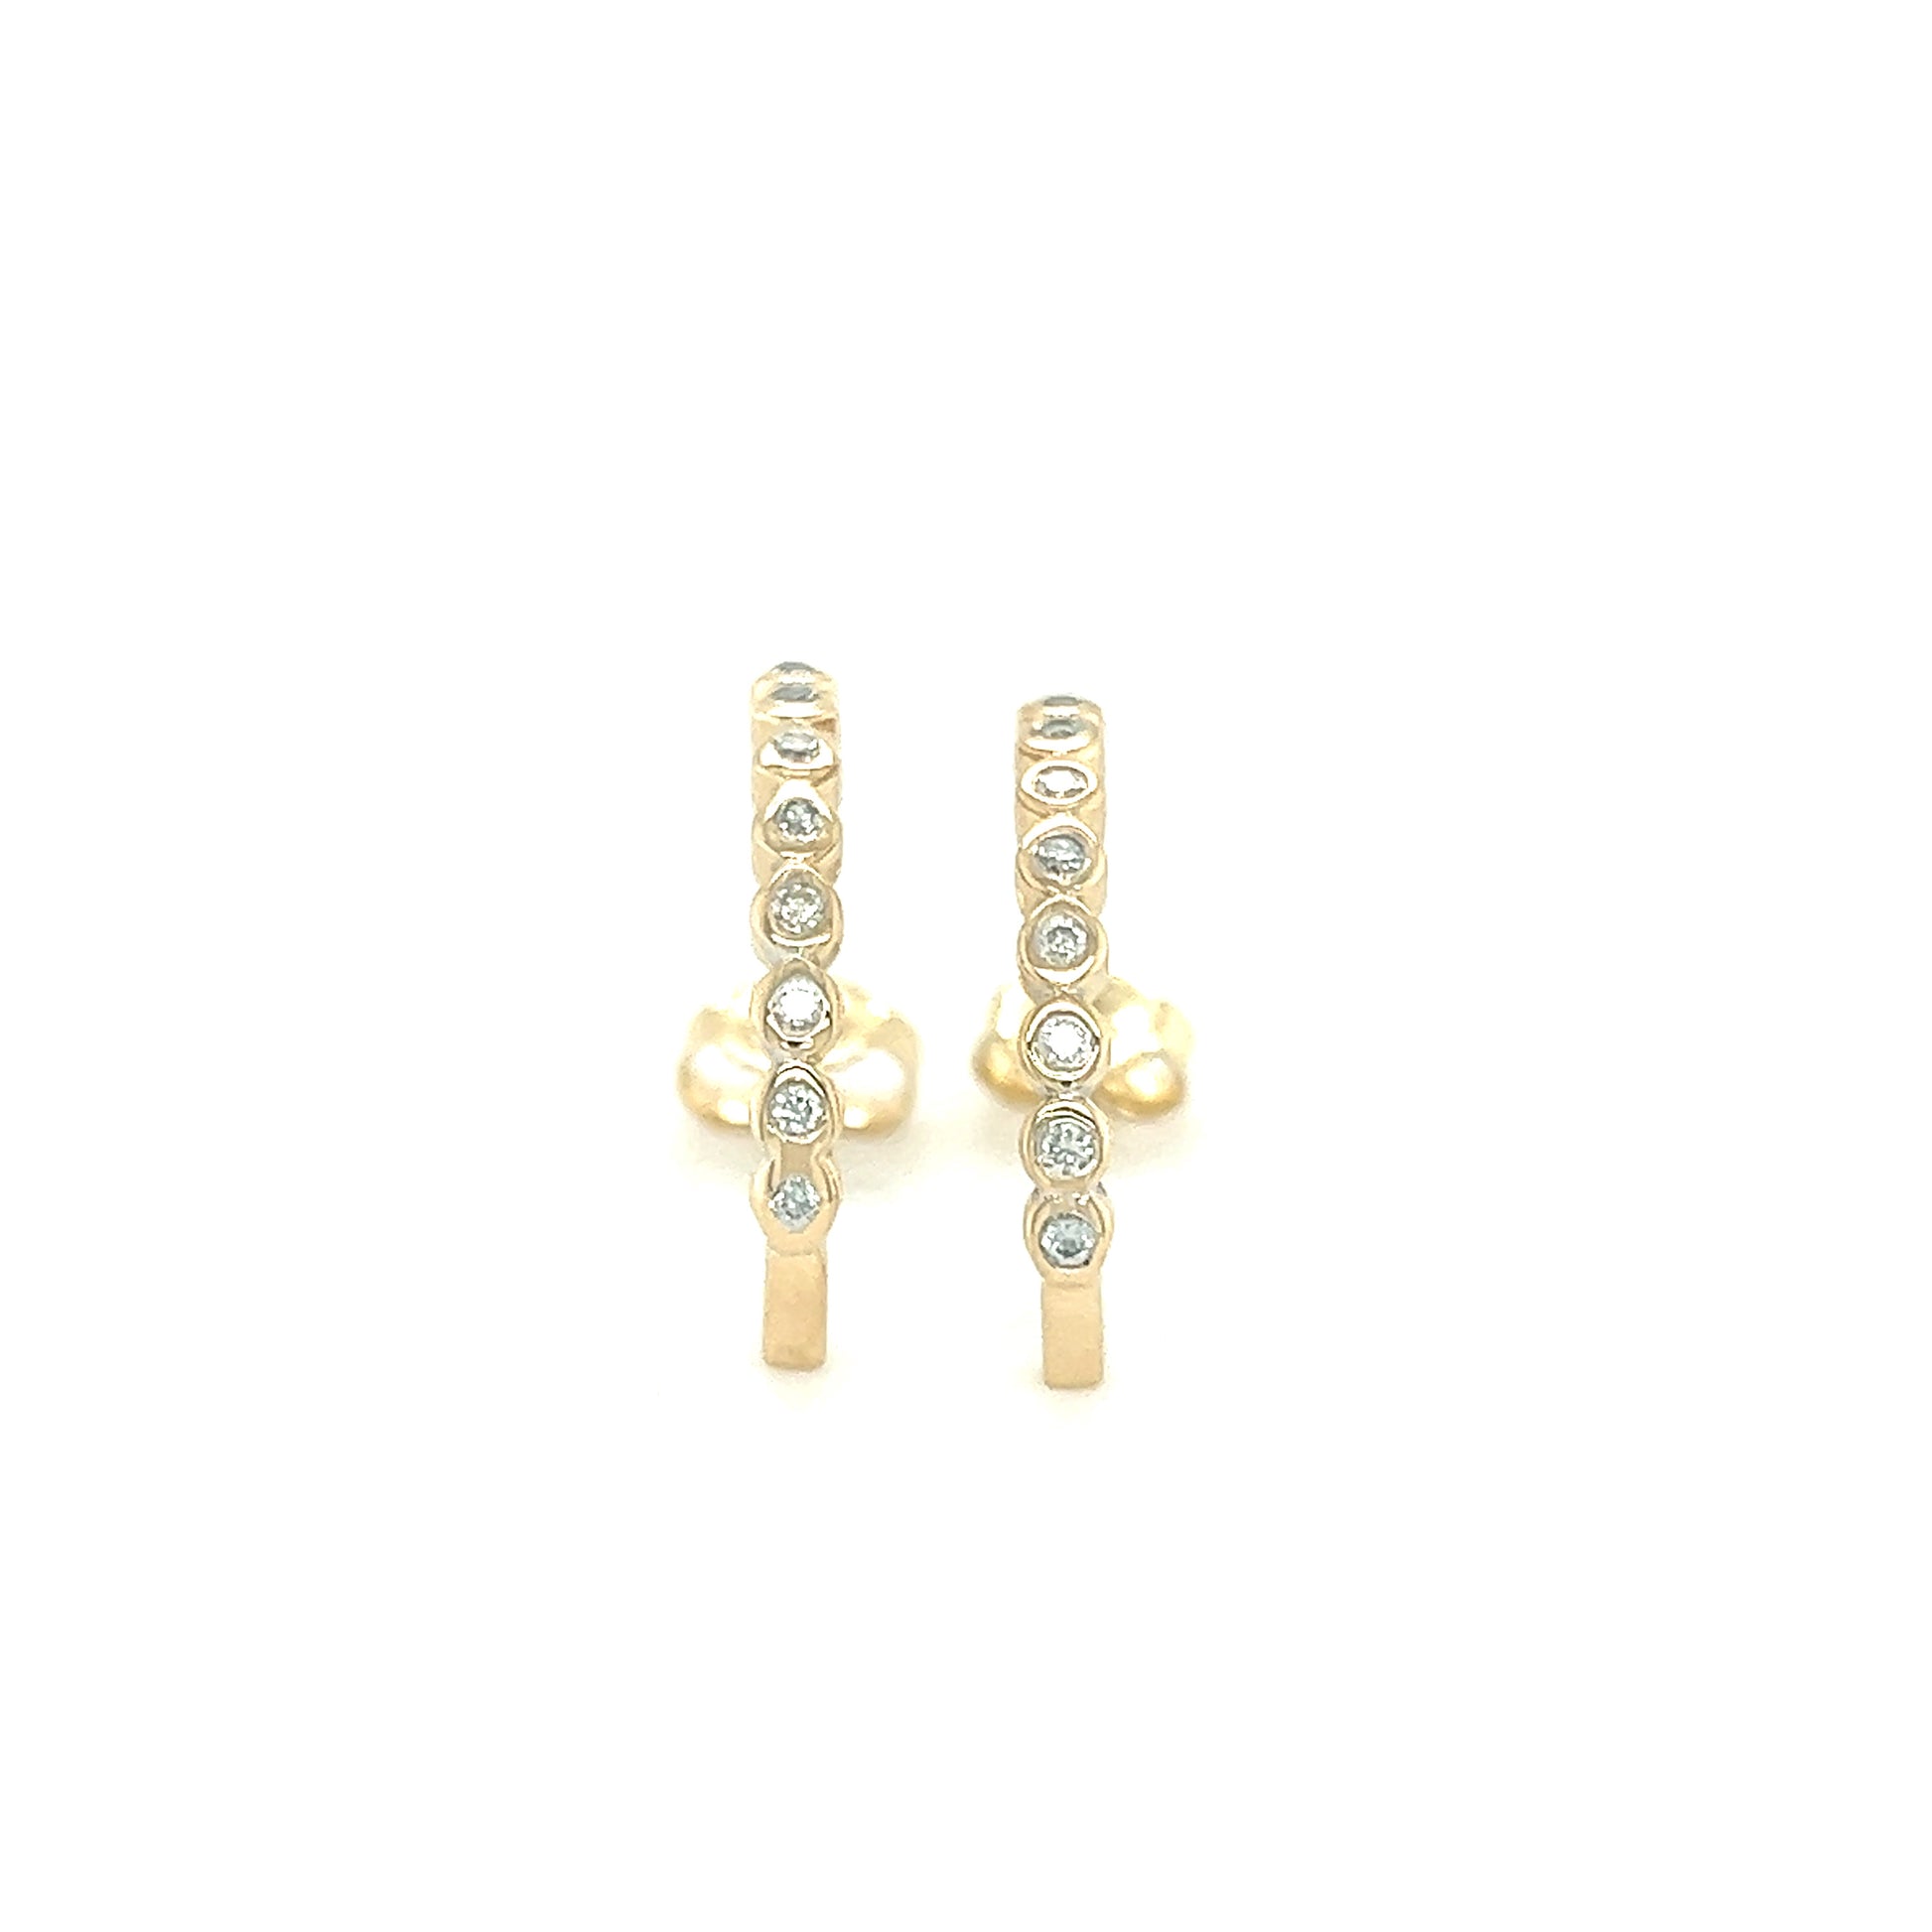 J-Hoop Earrings with Sixteen Diamonds in 14K Yellow Gold Front View